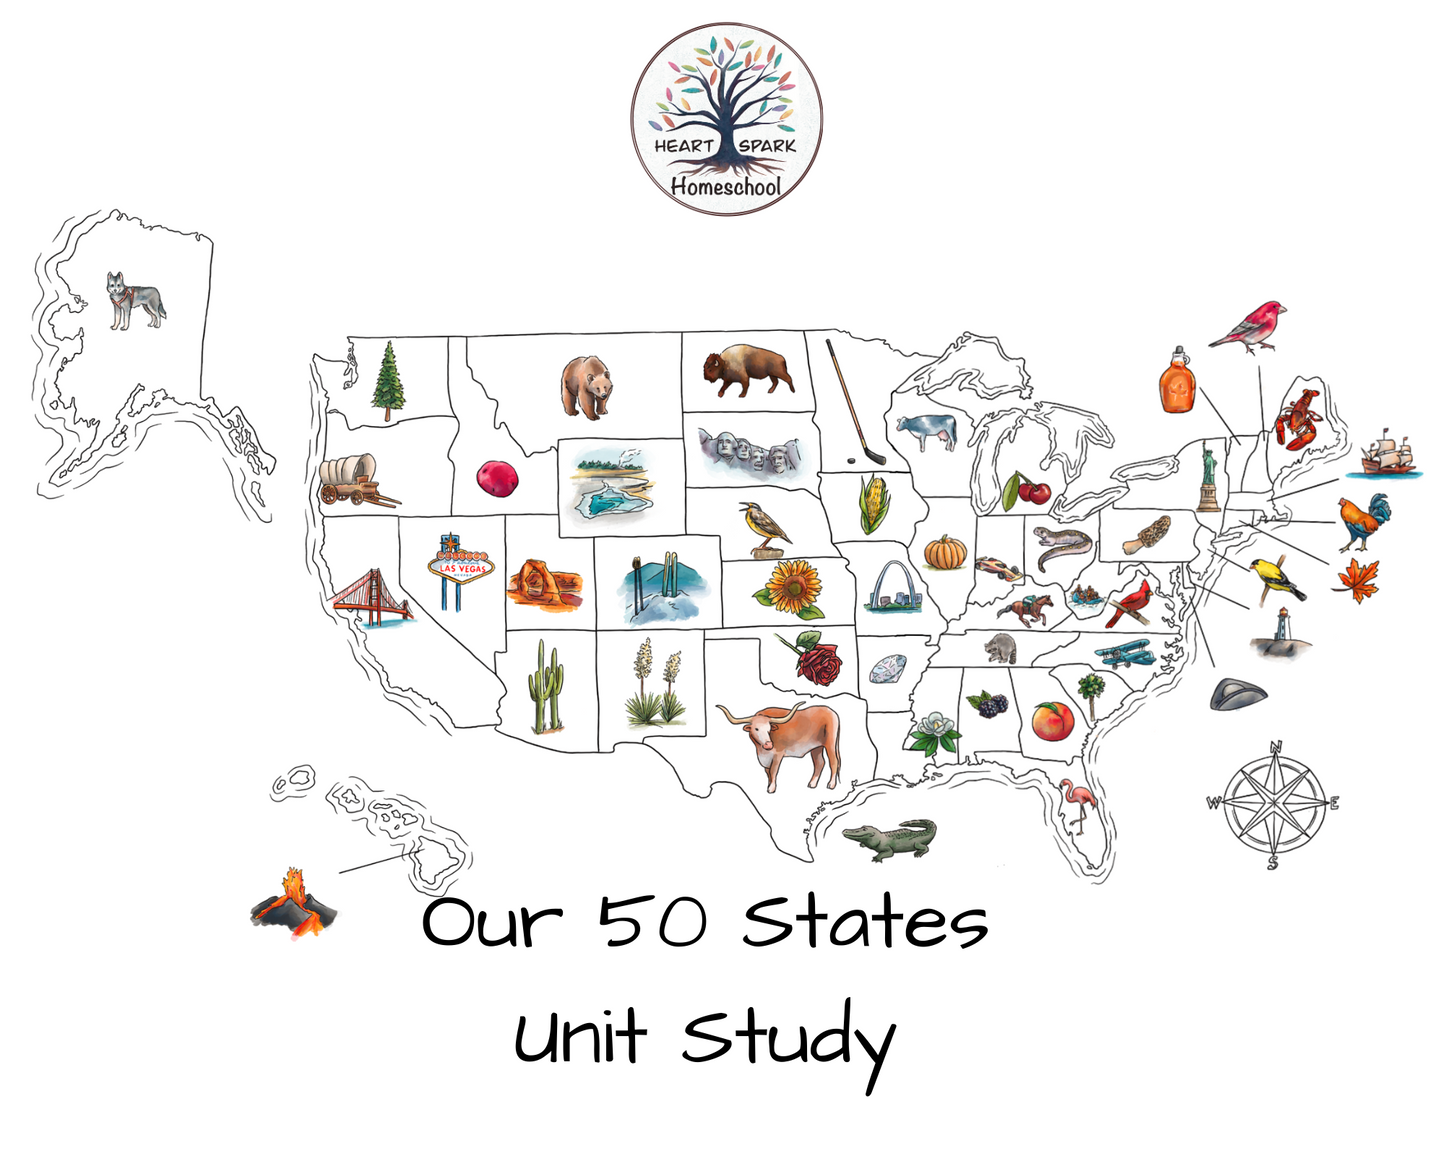 Our 50 States Full Unit Study